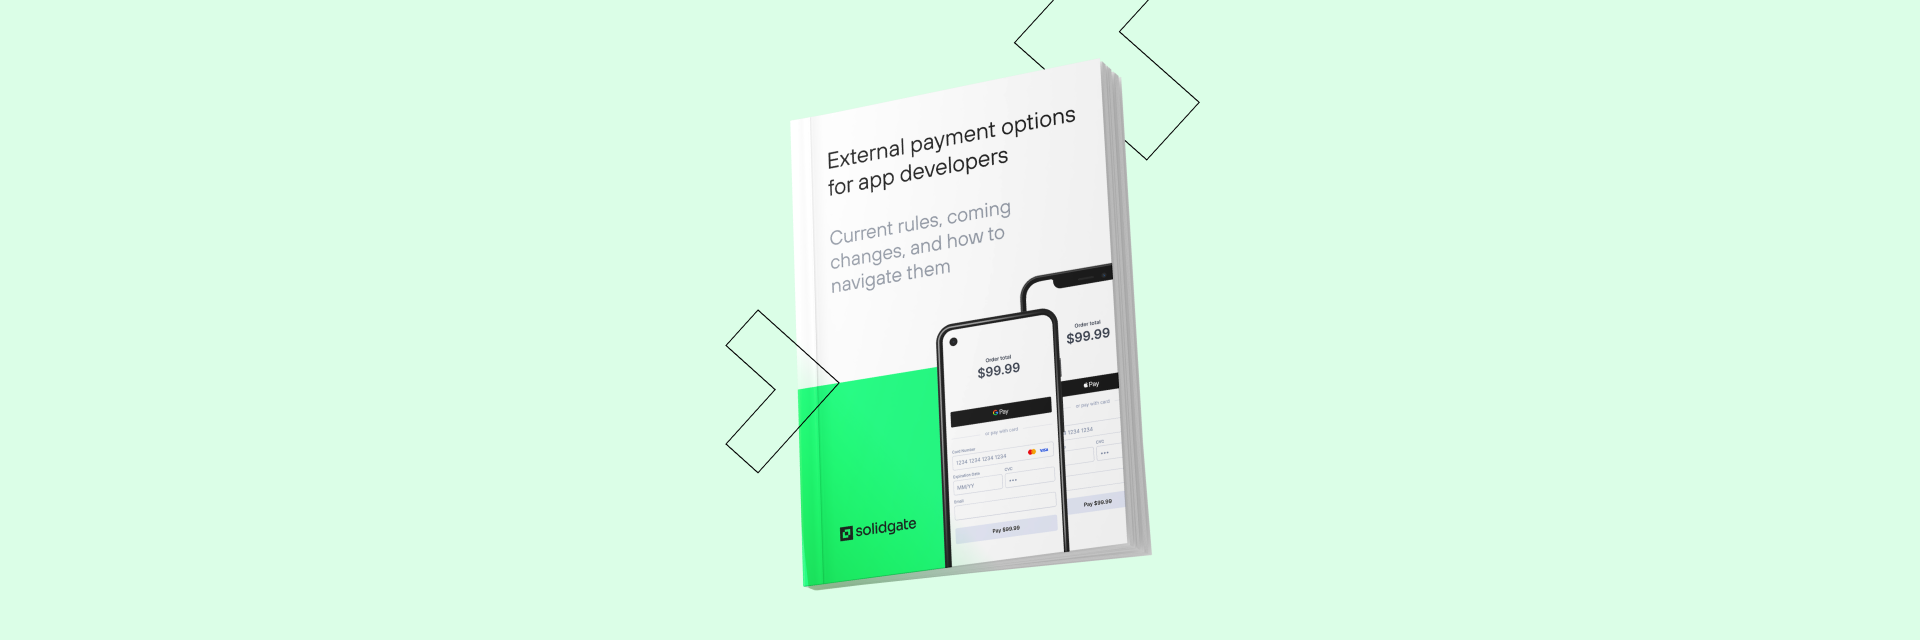 In-Depth Report: External Payment Options for App Developers